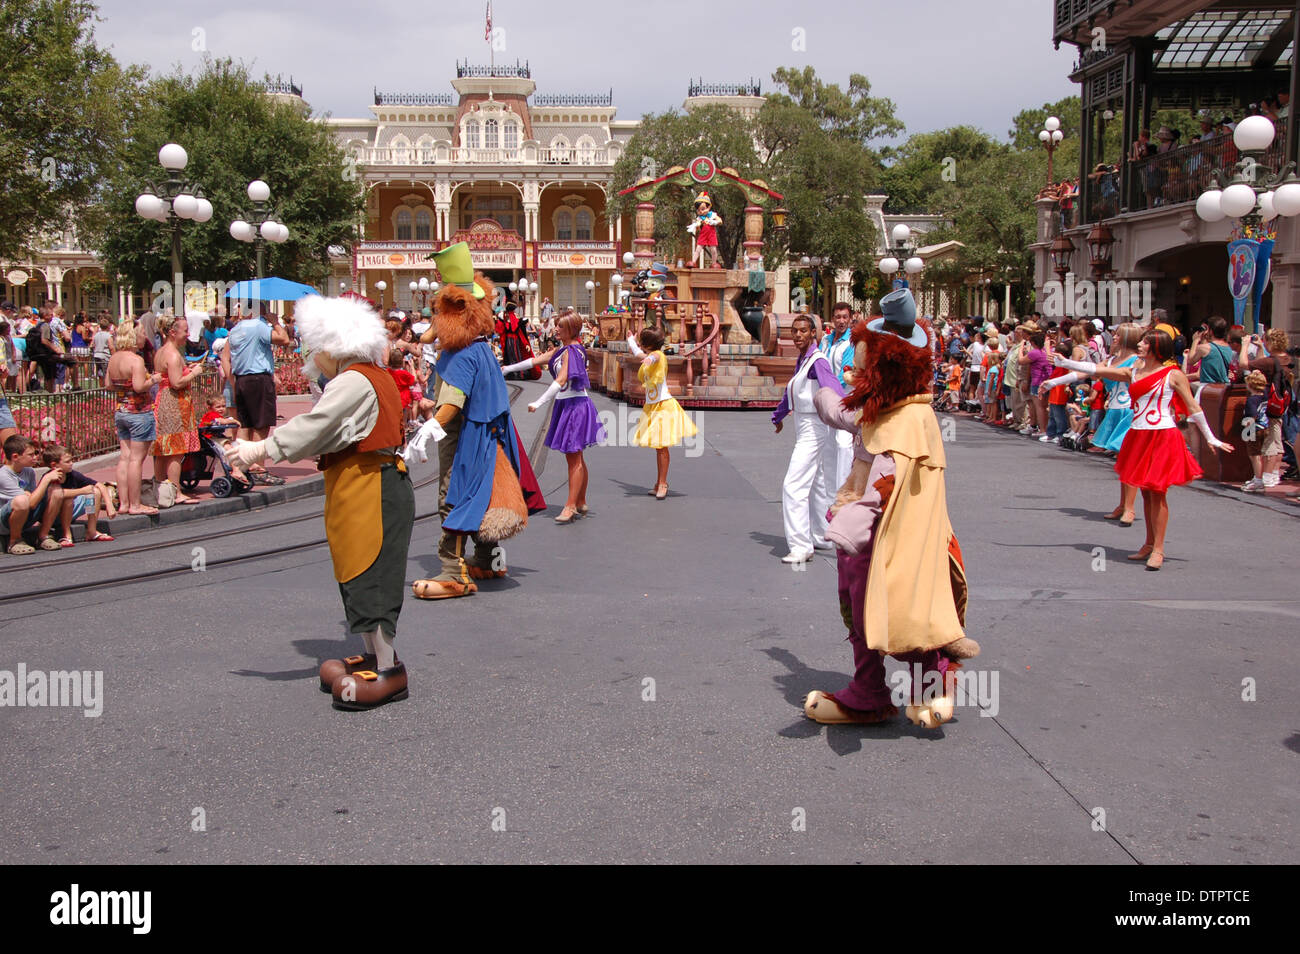 Performers in costume dancing on the streets celebrating A Dream Come True parade at Disney's Magic Kingdom, Walt Disney World, Orlando, U.S.A Stock Photo